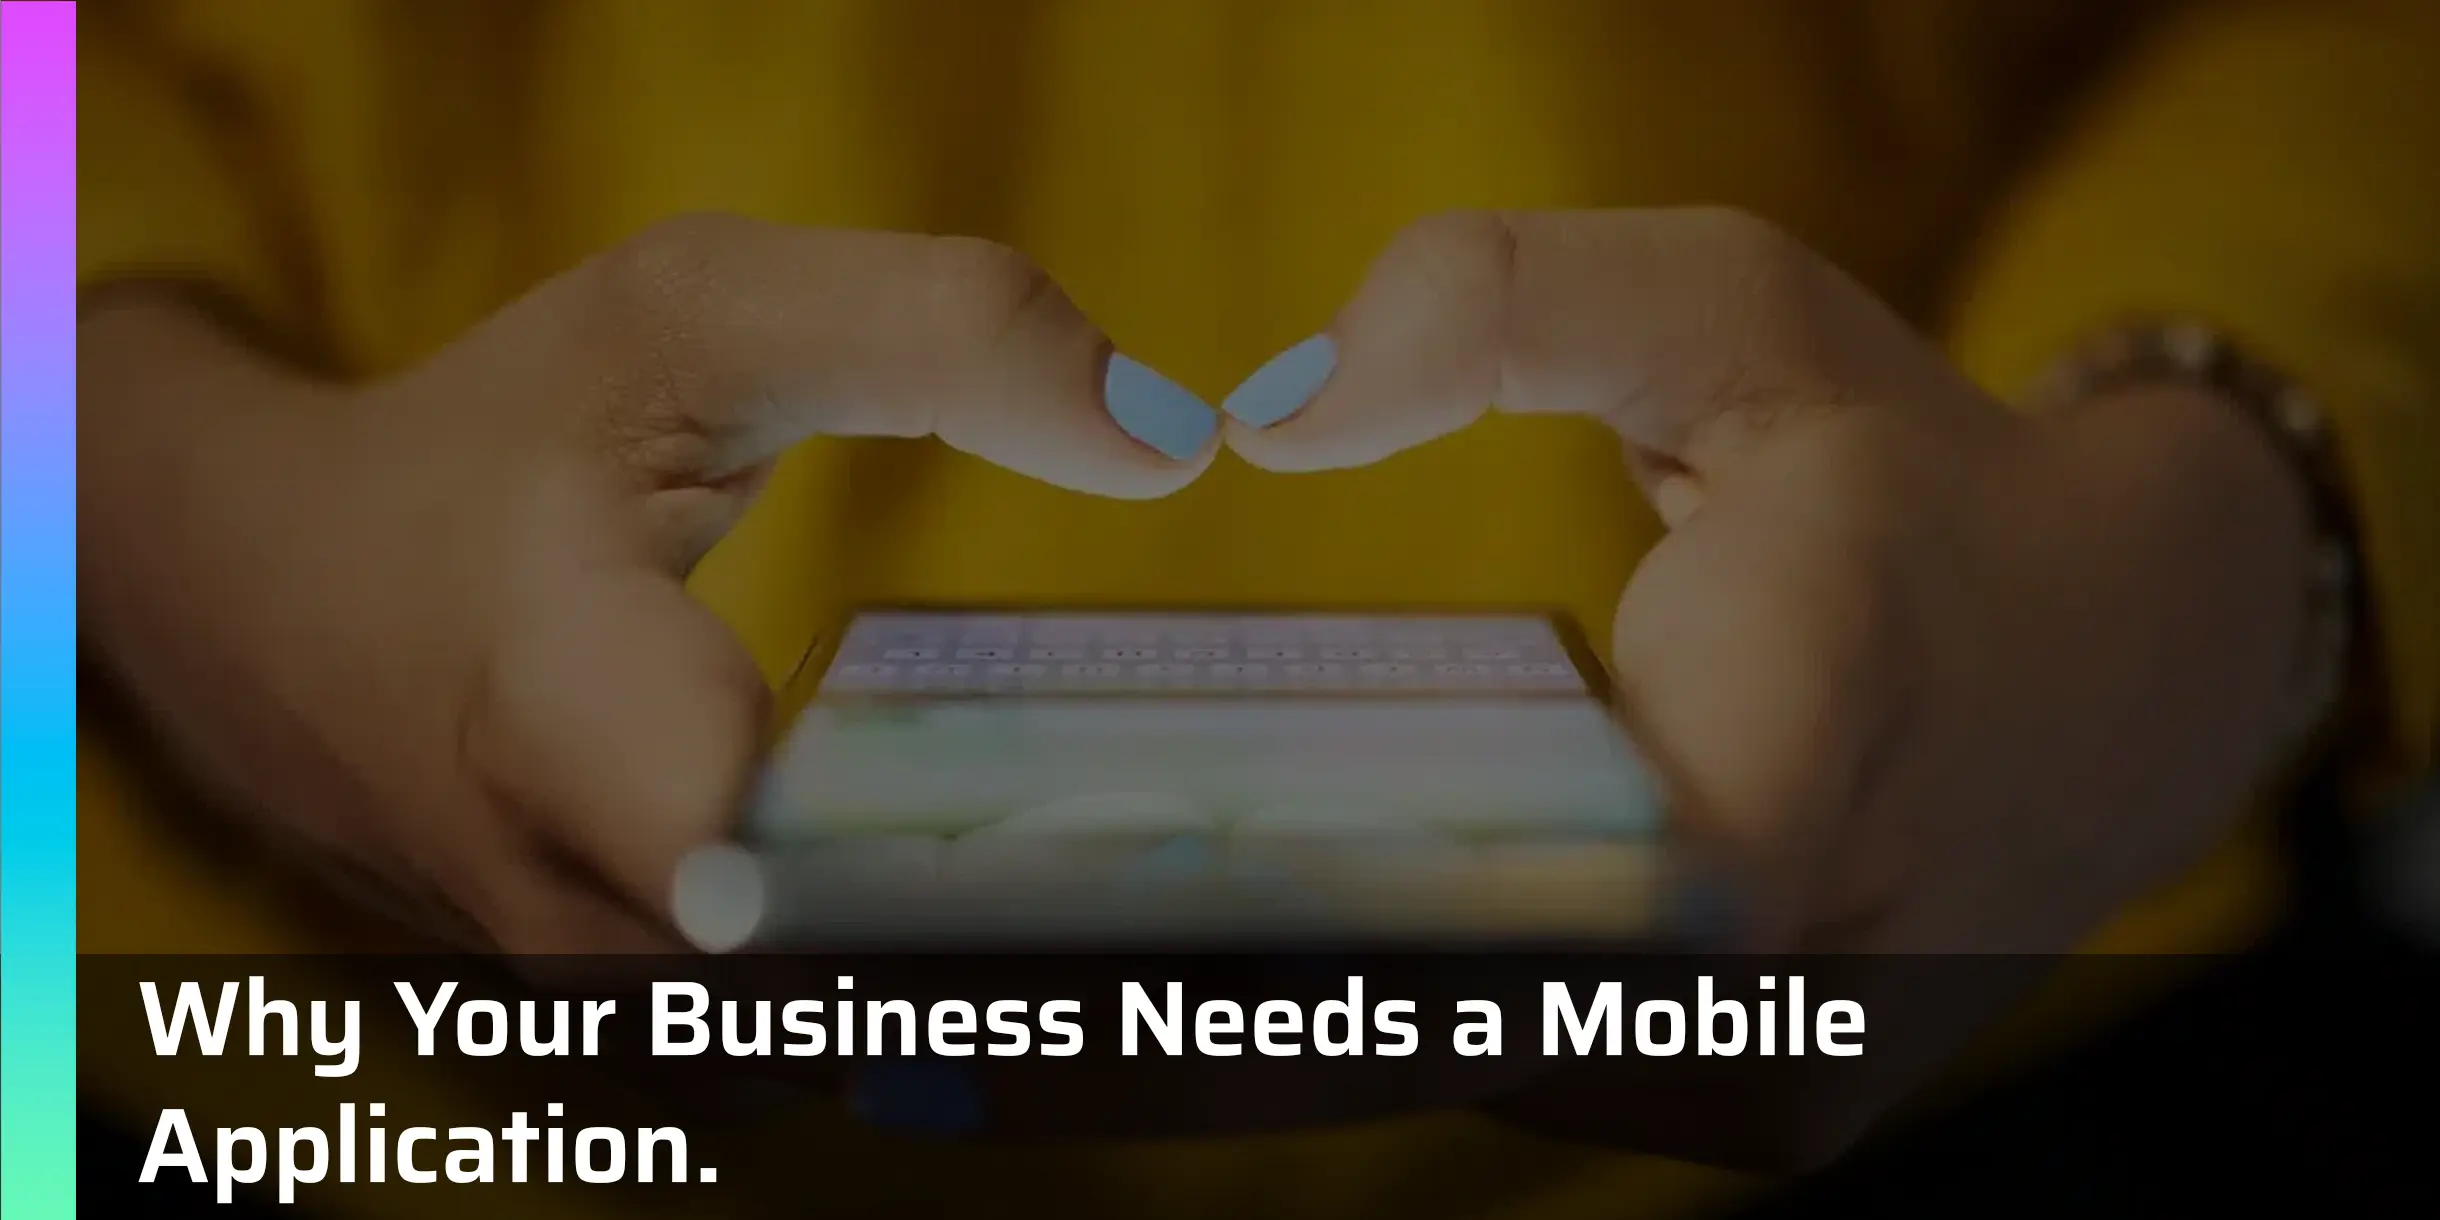 Why Your Business Needs a Mobile Application